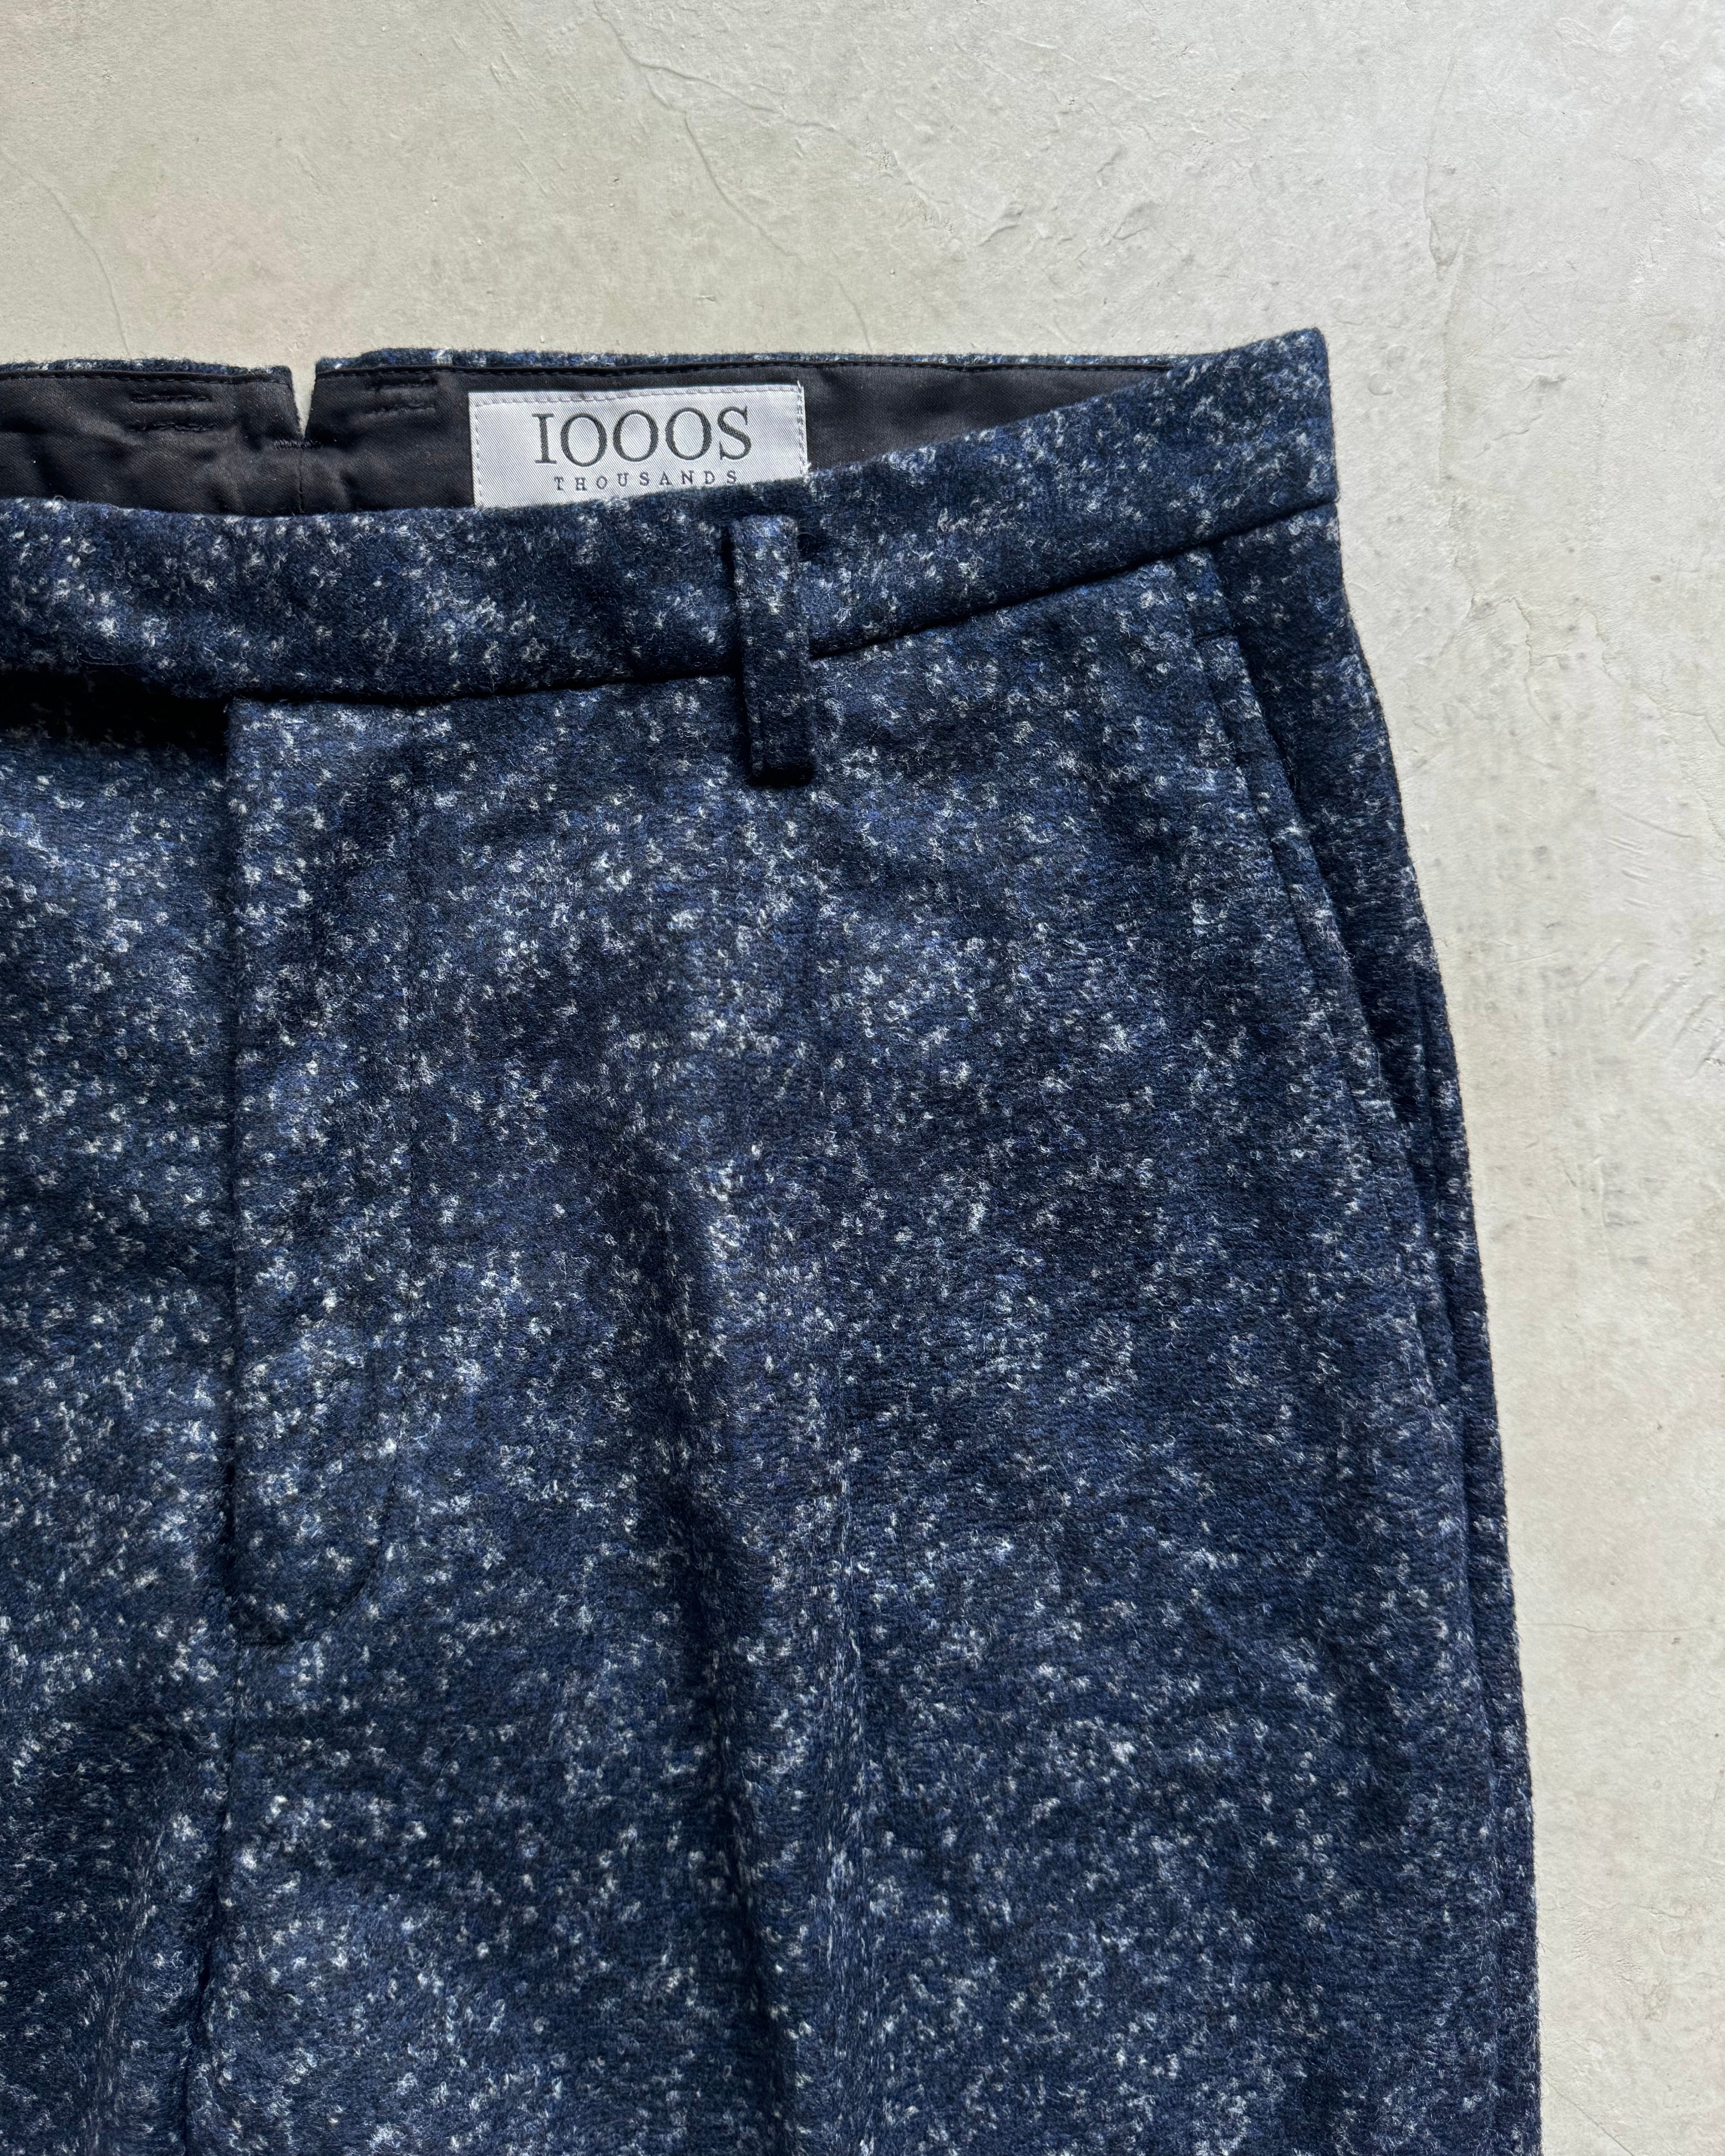 1000s thousands / SILVER KNIT TUCK TROUSERS - BLACK×NAVY MIX